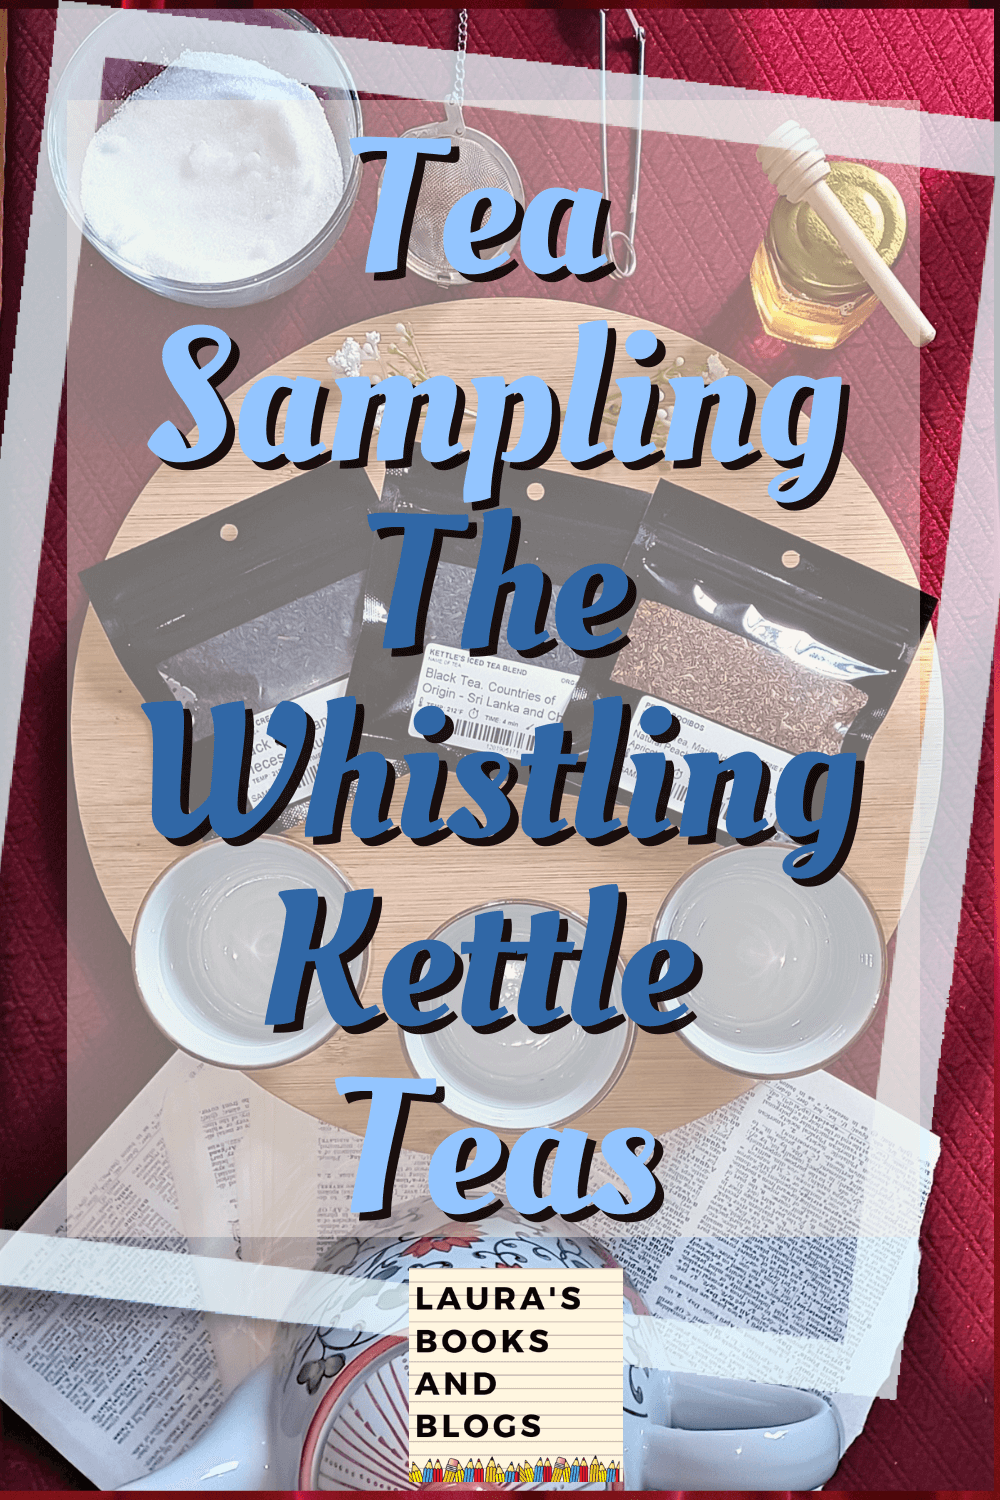 Whistling Kettle pin